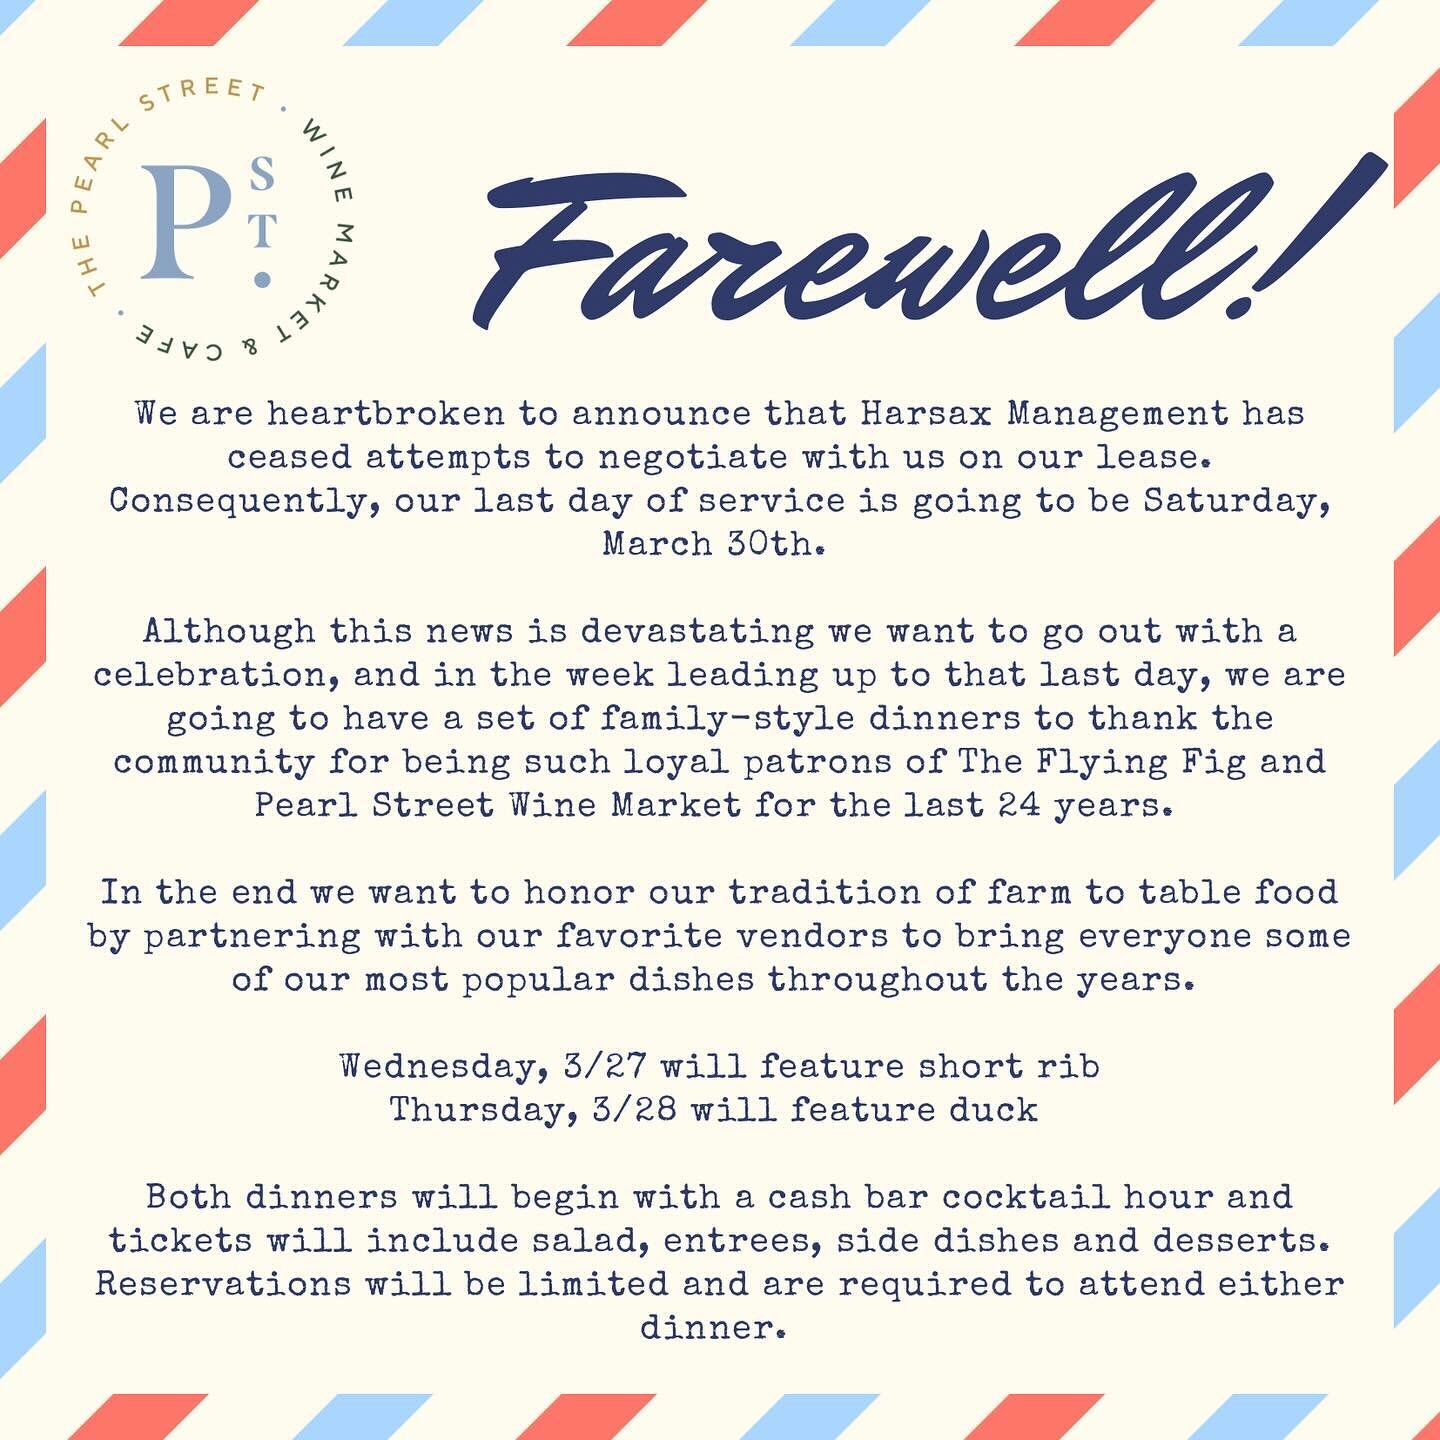 We are devastated to share this news but hope to celebrate our time here with all of you these last few weeks. Tickets for the dinners are linked in our bio.

#restaurantscle #theflyingfig #cleveland #supportsmallbusiness